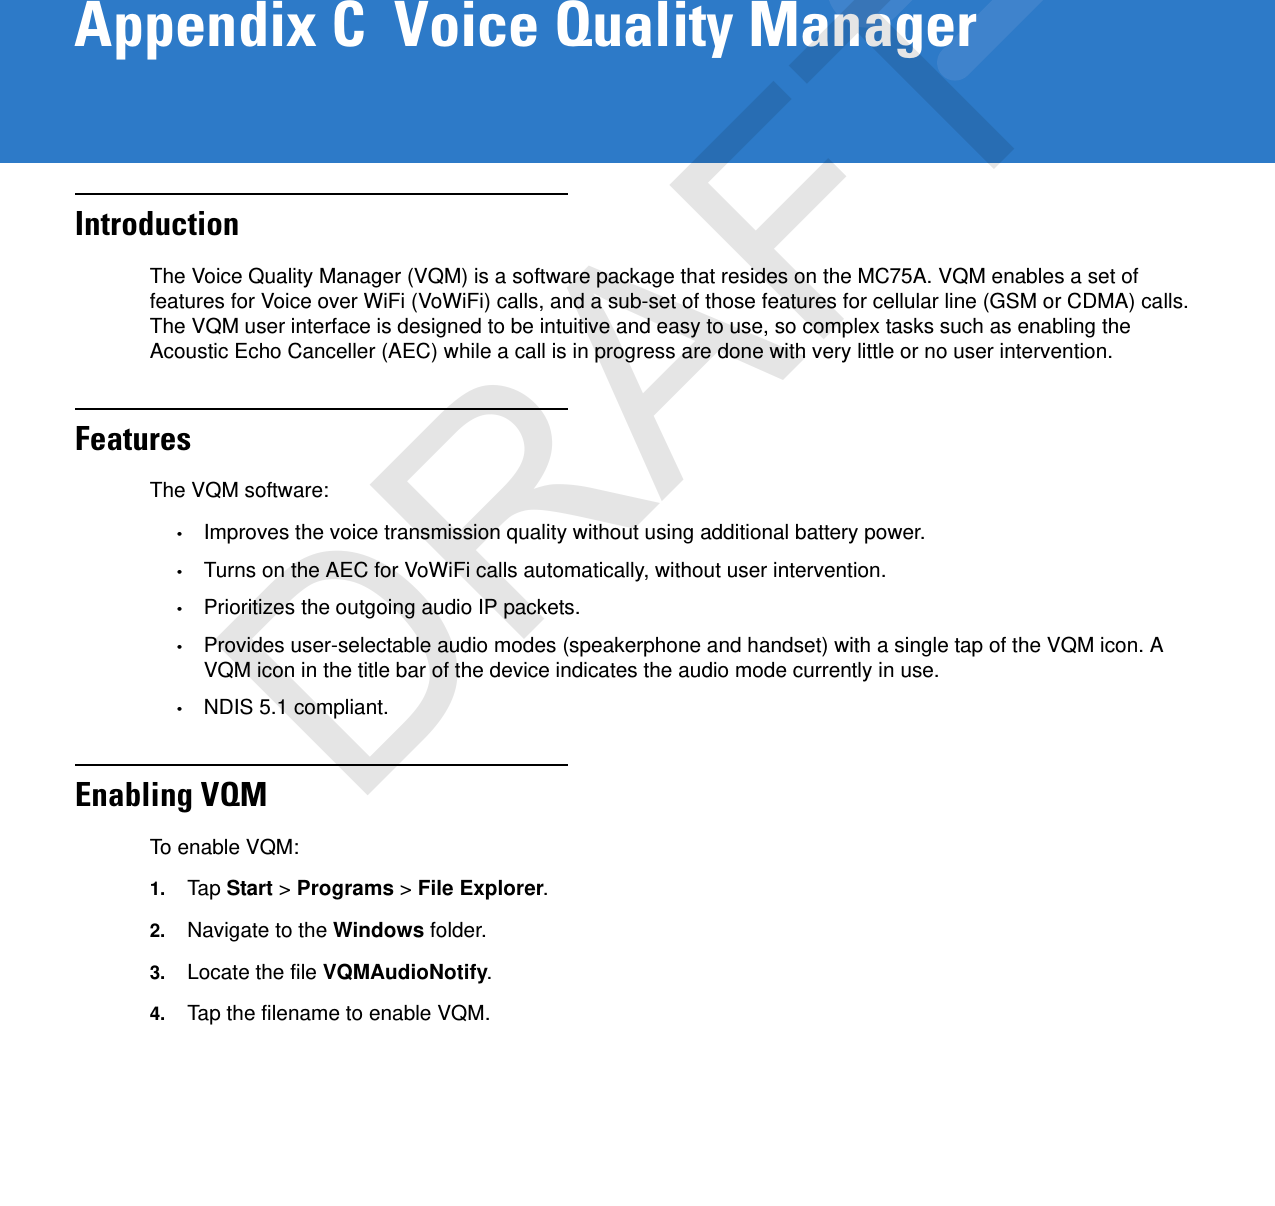 Appendix C  Voice Quality ManagerIntroductionThe Voice Quality Manager (VQM) is a software package that resides on the MC75A. VQM enables a set of features for Voice over WiFi (VoWiFi) calls, and a sub-set of those features for cellular line (GSM or CDMA) calls. The VQM user interface is designed to be intuitive and easy to use, so complex tasks such as enabling the Acoustic Echo Canceller (AEC) while a call is in progress are done with very little or no user intervention.FeaturesThe VQM software:•Improves the voice transmission quality without using additional battery power.•Turns on the AEC for VoWiFi calls automatically, without user intervention.•Prioritizes the outgoing audio IP packets.•Provides user-selectable audio modes (speakerphone and handset) with a single tap of the VQM icon. A VQM icon in the title bar of the device indicates the audio mode currently in use.•NDIS 5.1 compliant.Enabling VQMTo enable VQM:1. Tap  Start &gt; Programs &gt; File Explorer.2. Navigate to the Windows folder.3. Locate the file VQMAudioNotify.4. Tap the filename to enable VQM.DRAFT